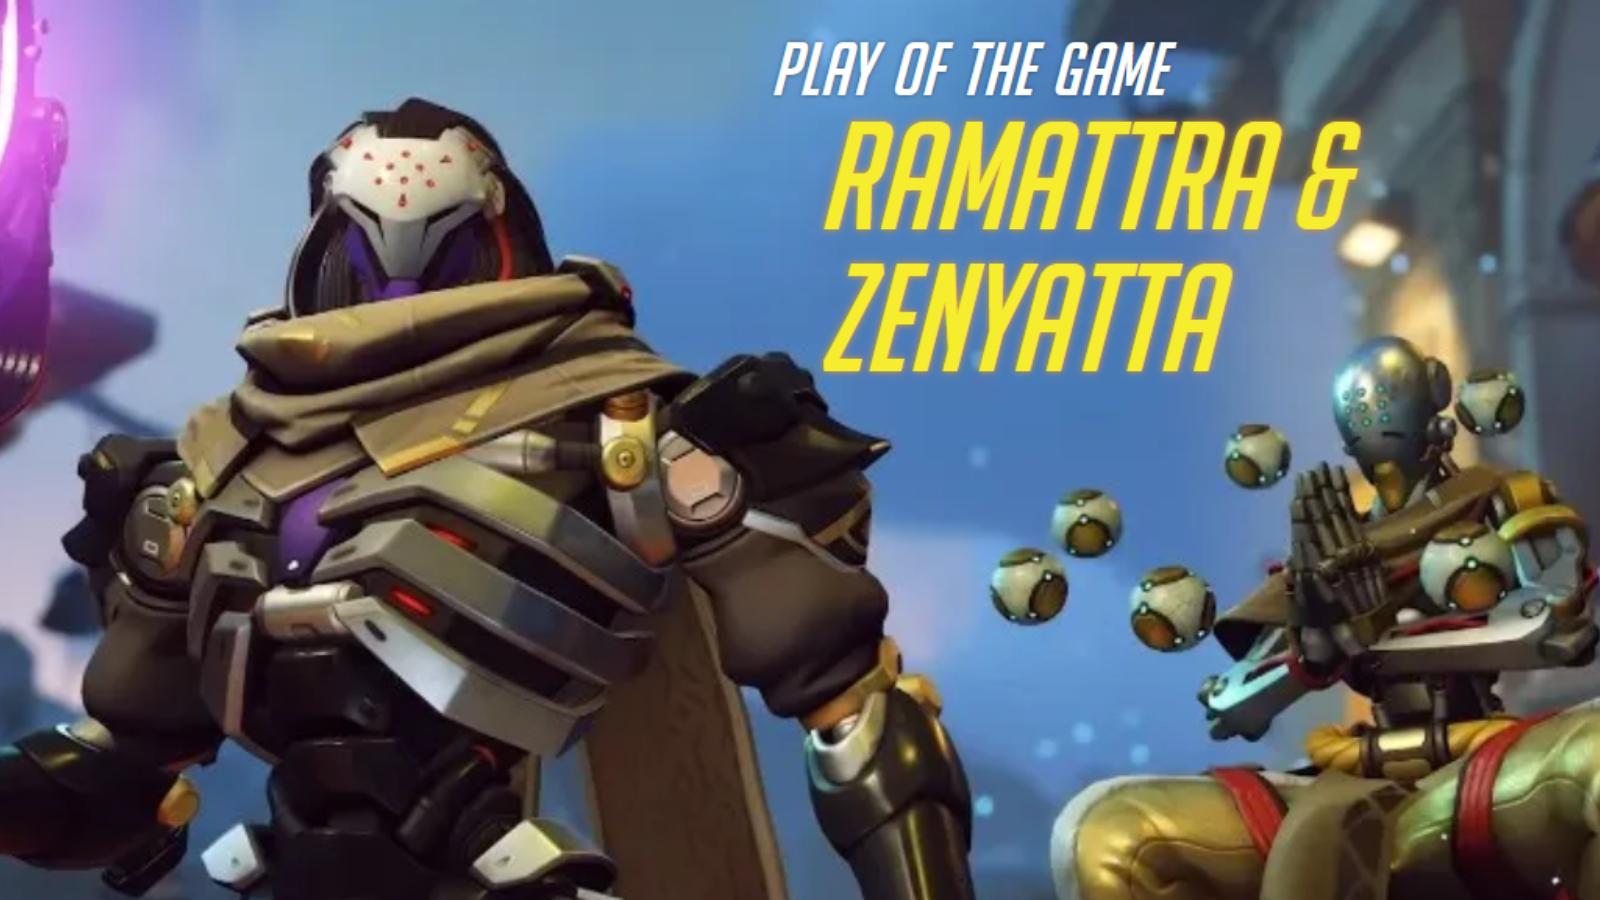 ow2 shared POTG feature